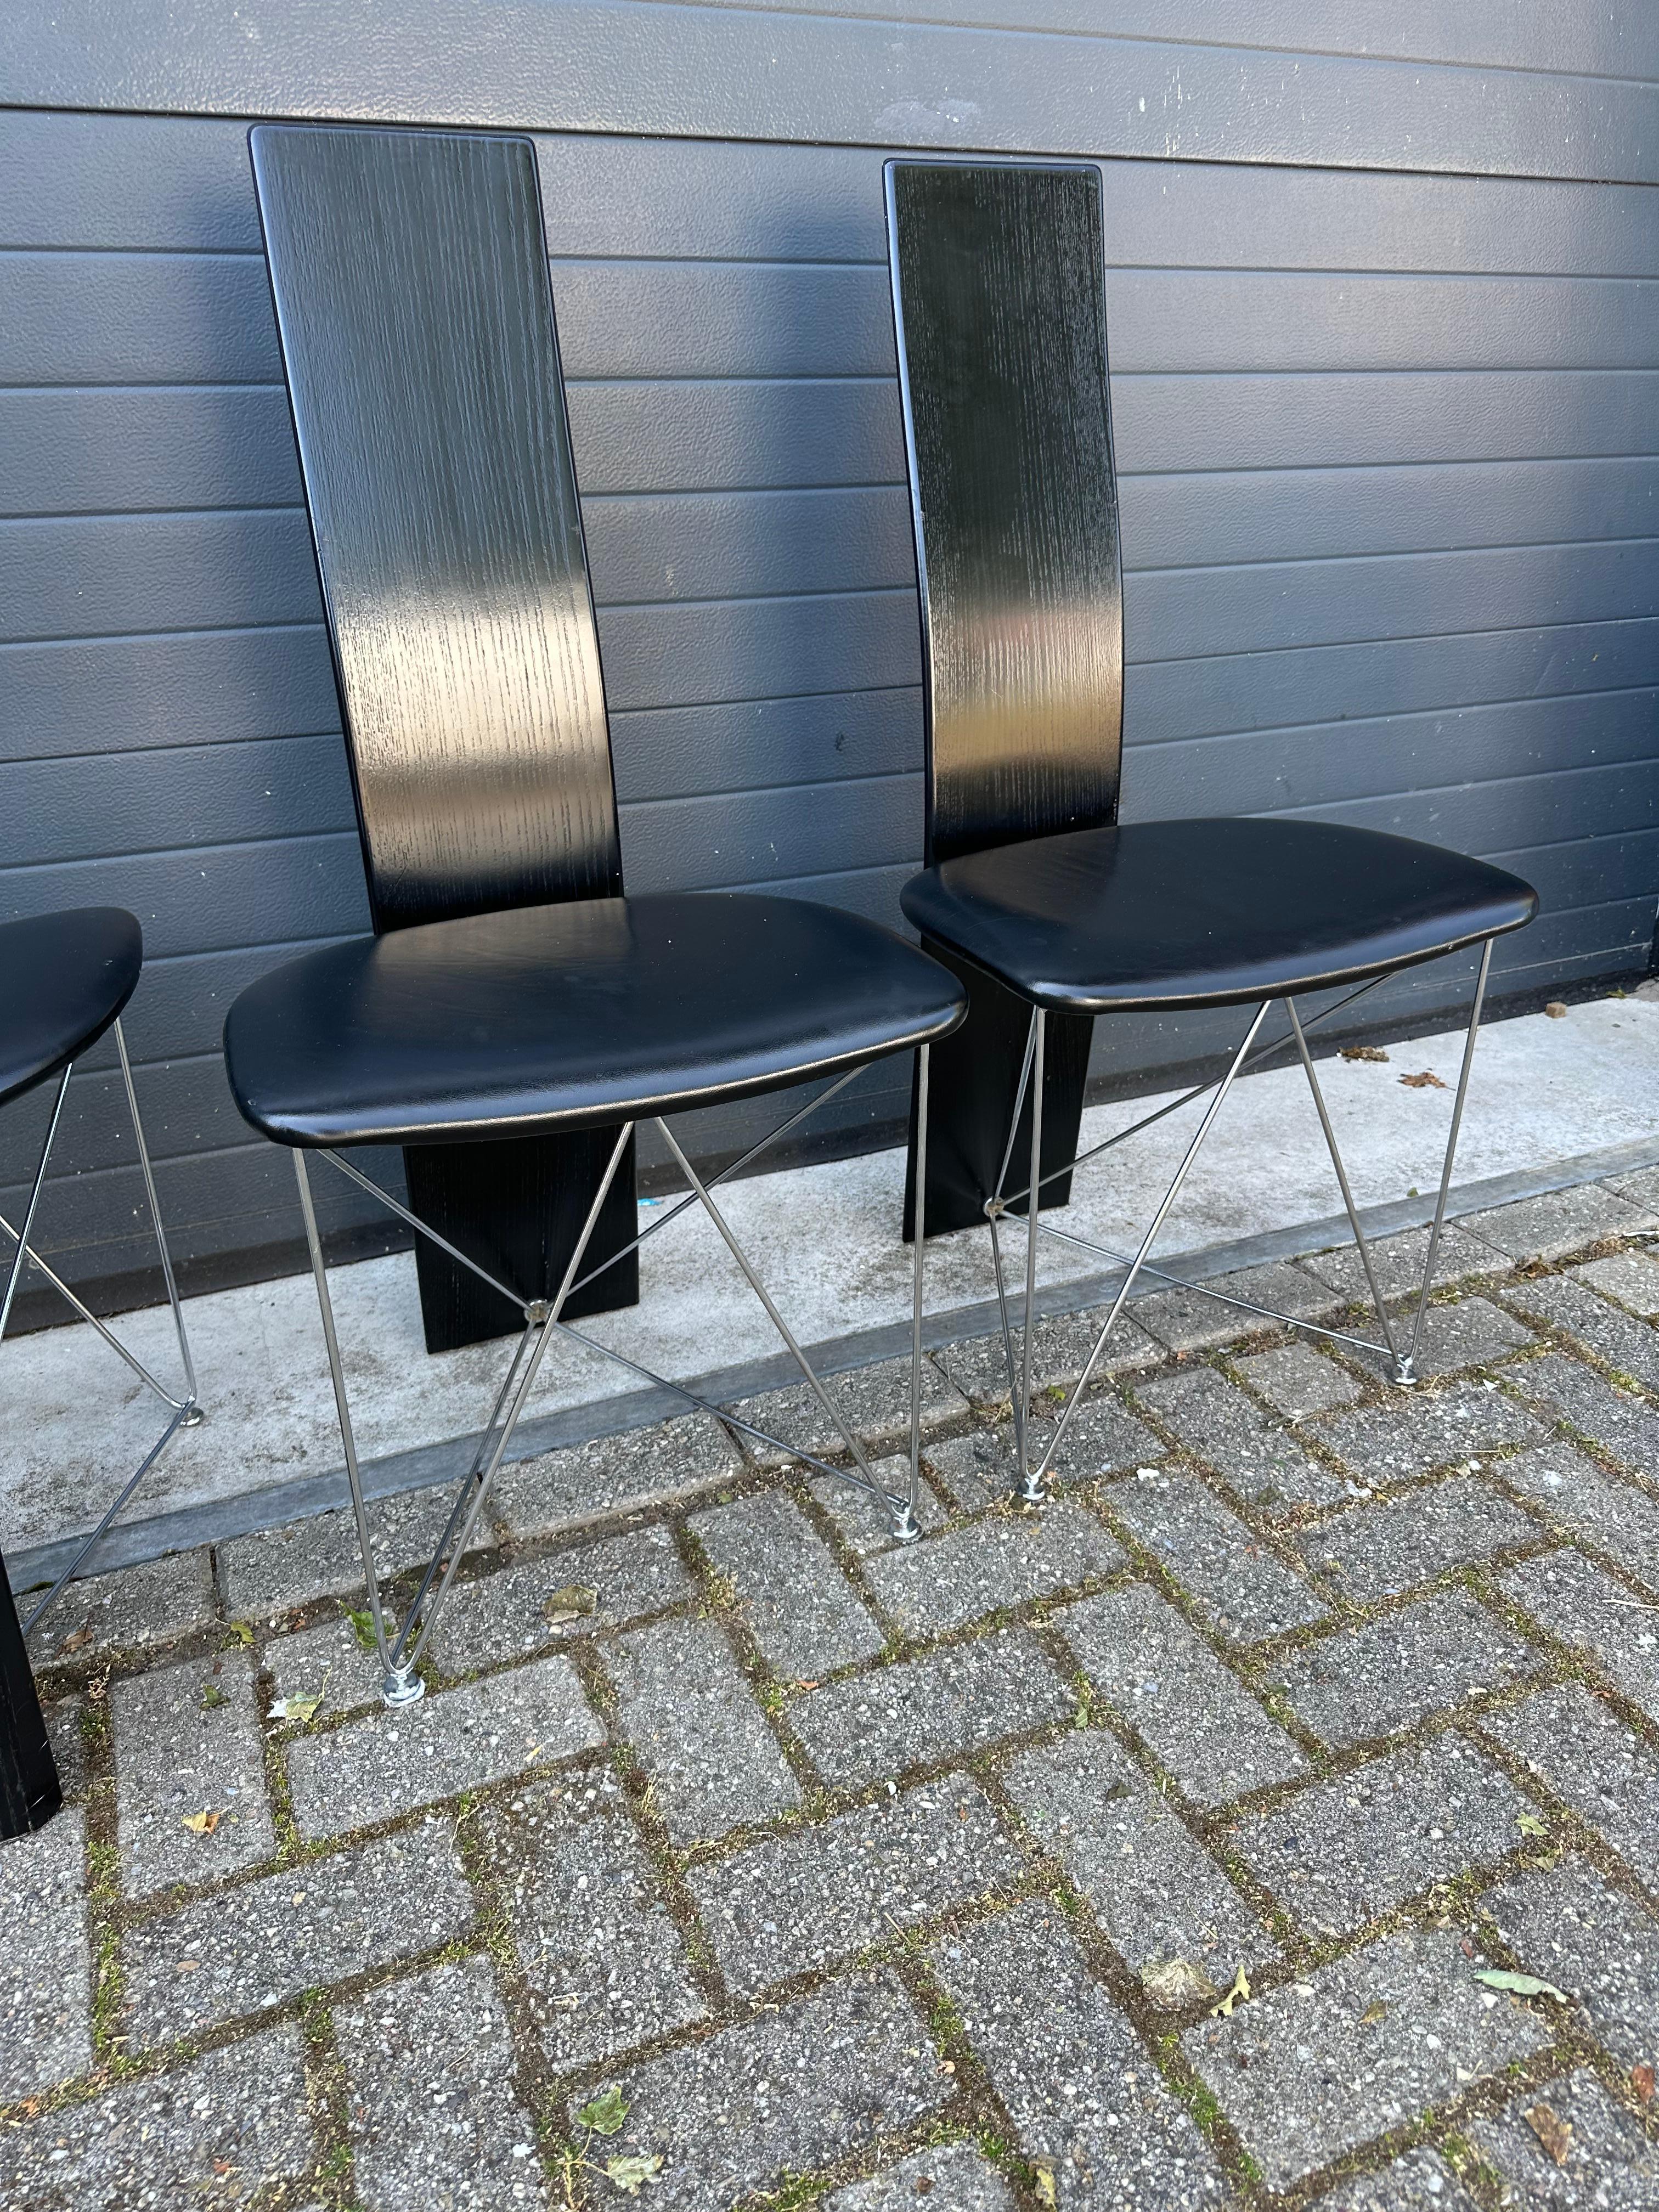 The Moderns Set of 4 Dining Chairs with Leather Seats by Torstein Flatøy for Bahus en vente 5